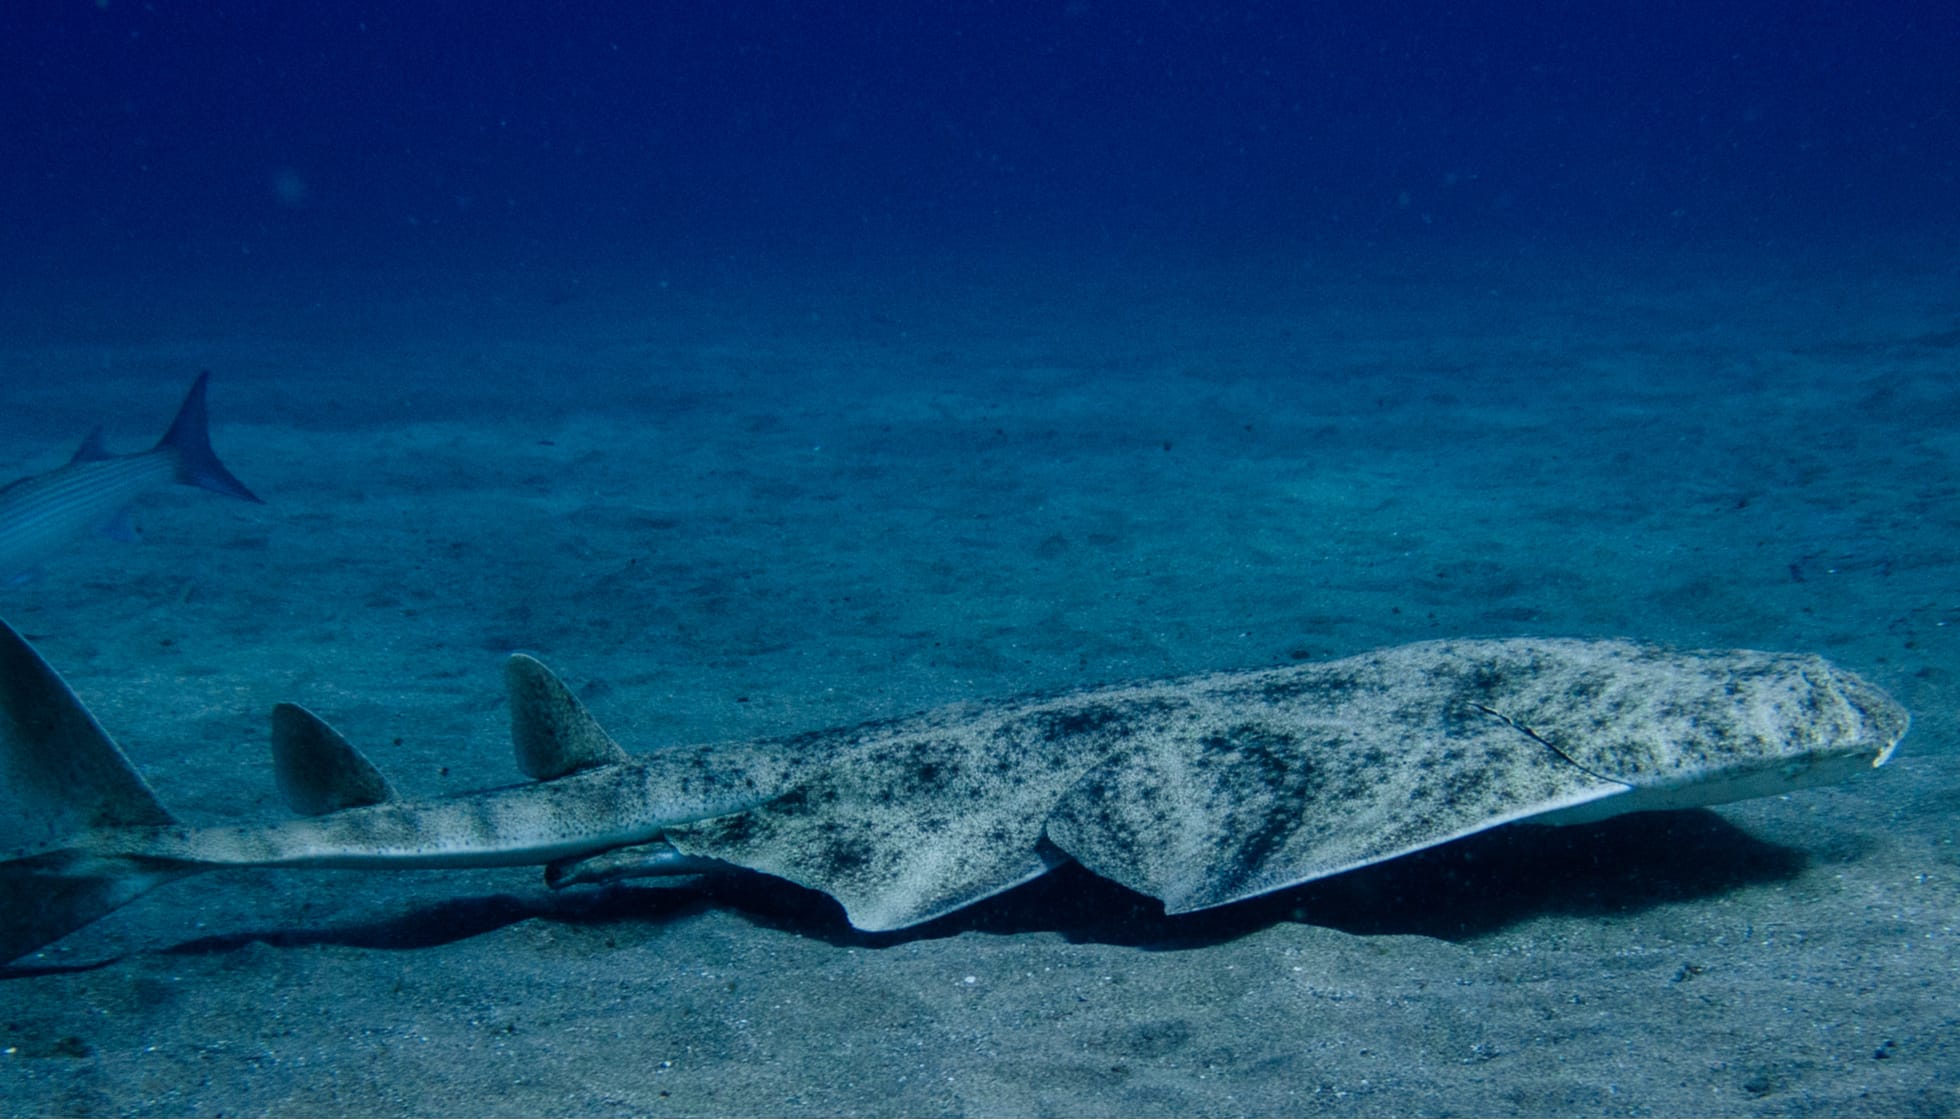 Want to see an angel shark in Tenerife?